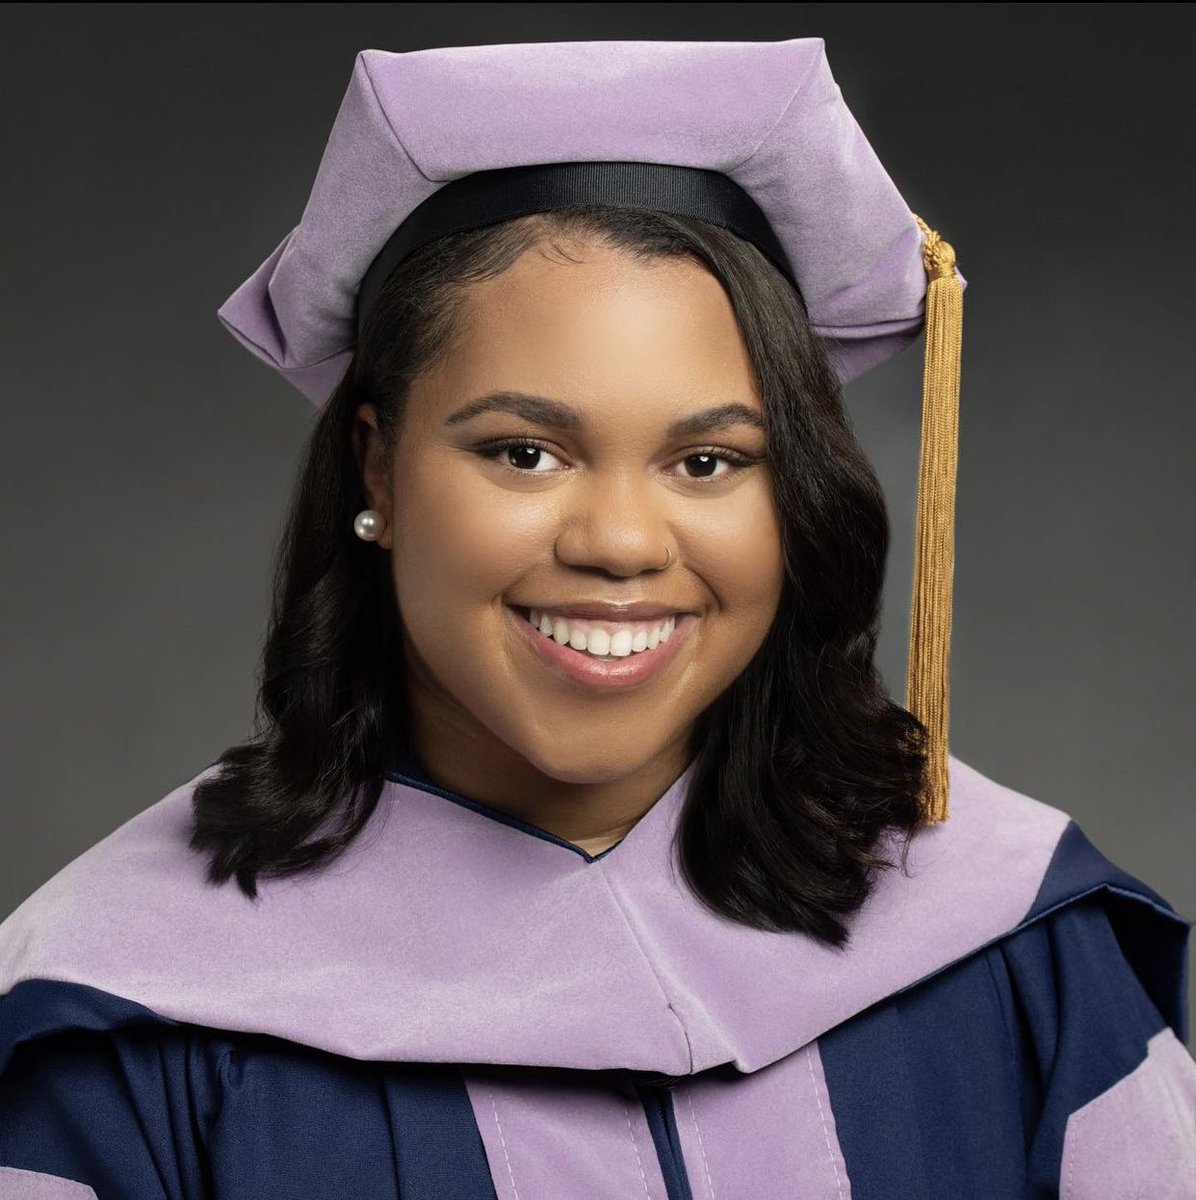 I’m so proud of you baby girl! For always and forever; Dr. C. Nycole Henderson, DDS. 

Destined for greatness without a doubt. God is shining through you! I’m watching the lord work, I am glad the lord picked you to battle life. Strong Warrior!
#HowardGrad21 #dentistry #HBCUGrad